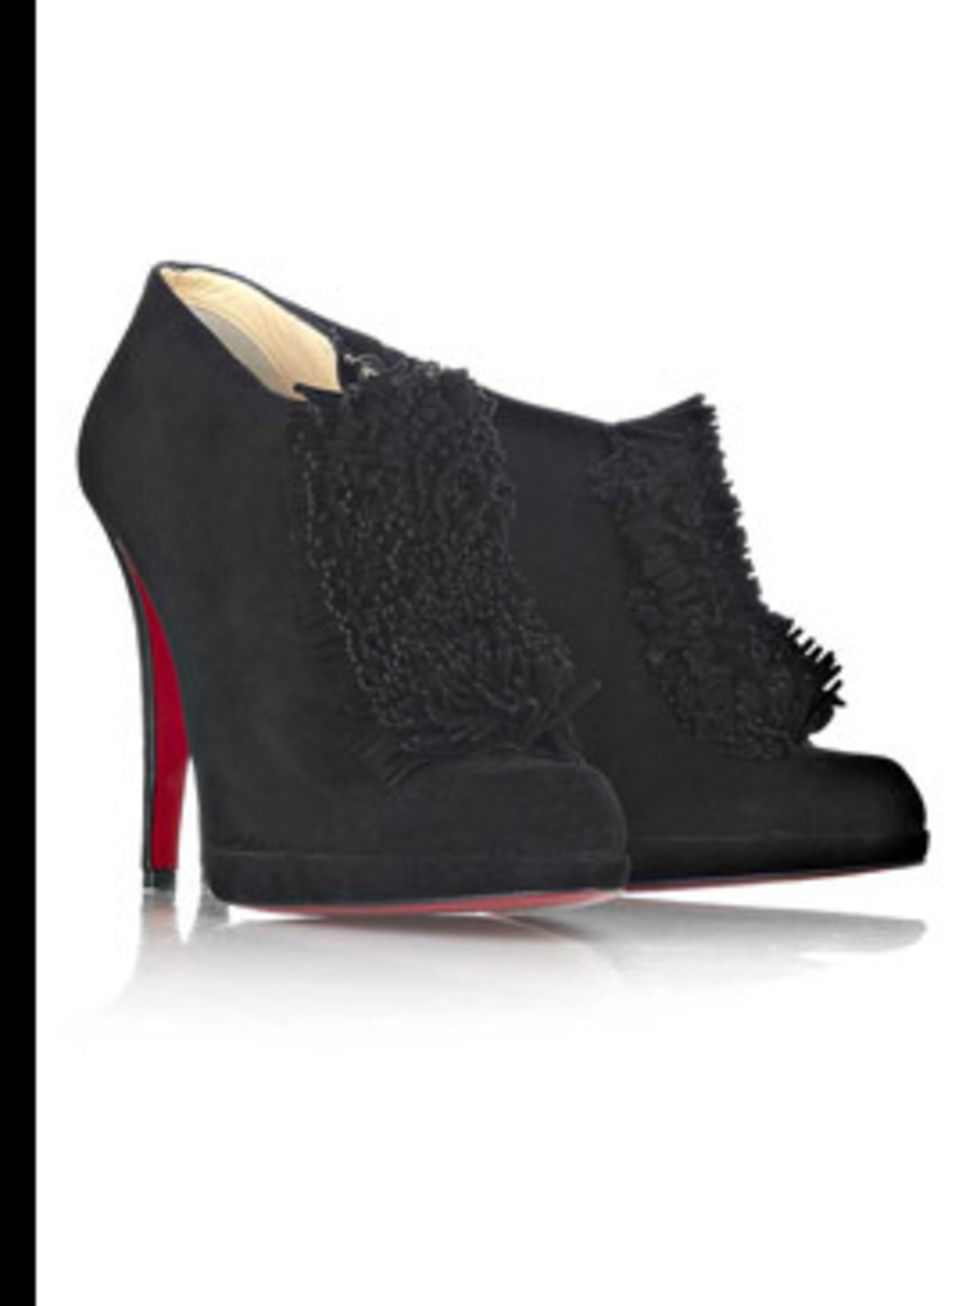 <p>Suede tuxedo ruffle ankle boots, £595, by Christian Louboutin at (0207 245 6510)</p>